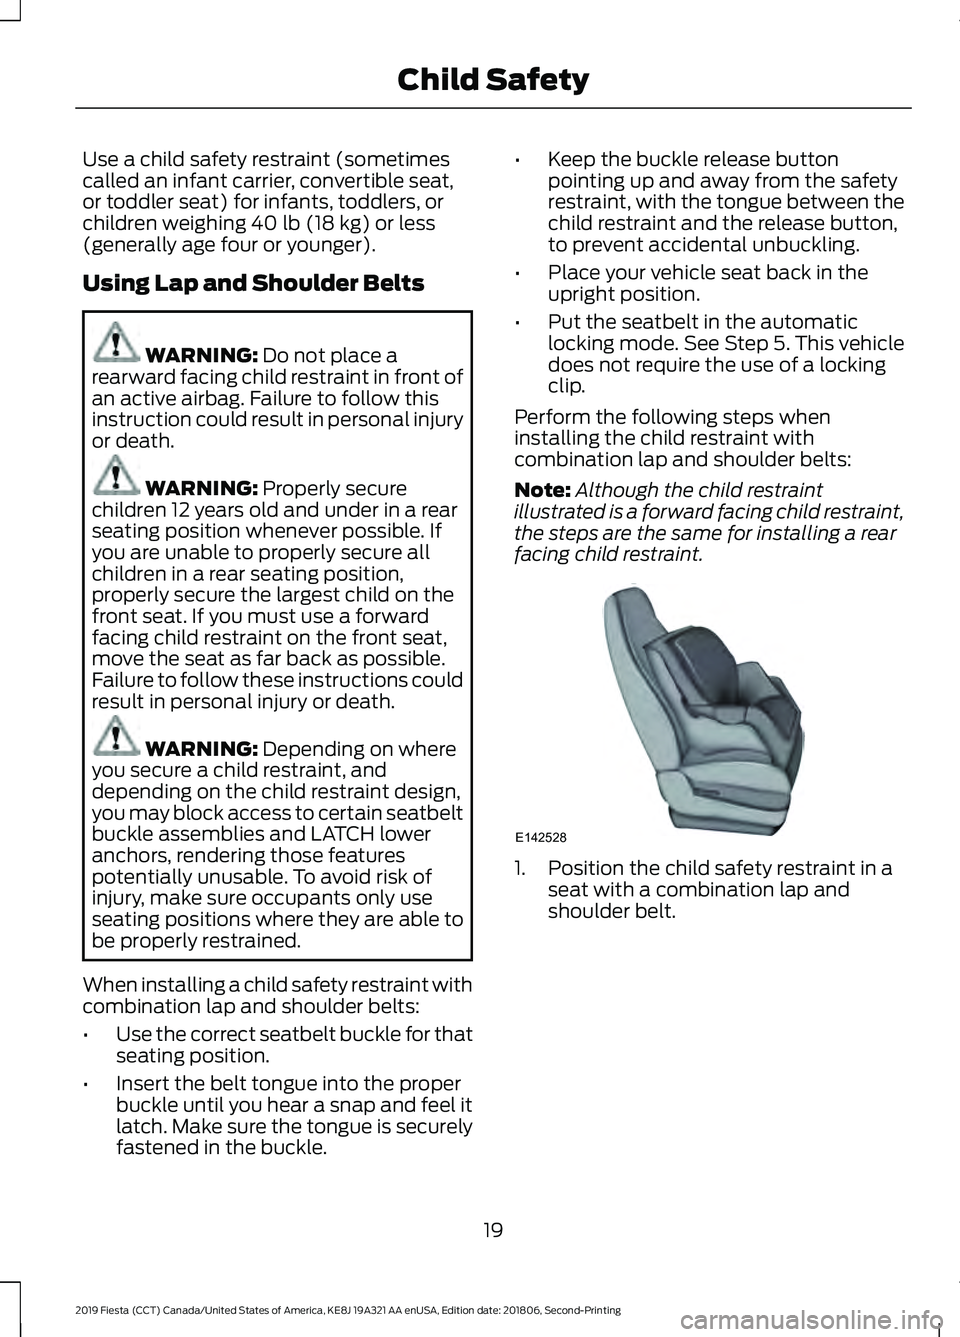 FORD FIESTA 2019  Owners Manual Use a child safety restraint (sometimes
called an infant carrier, convertible seat,
or toddler seat) for infants, toddlers, or
children weighing 40 lb (18 kg) or less
(generally age four or younger).
